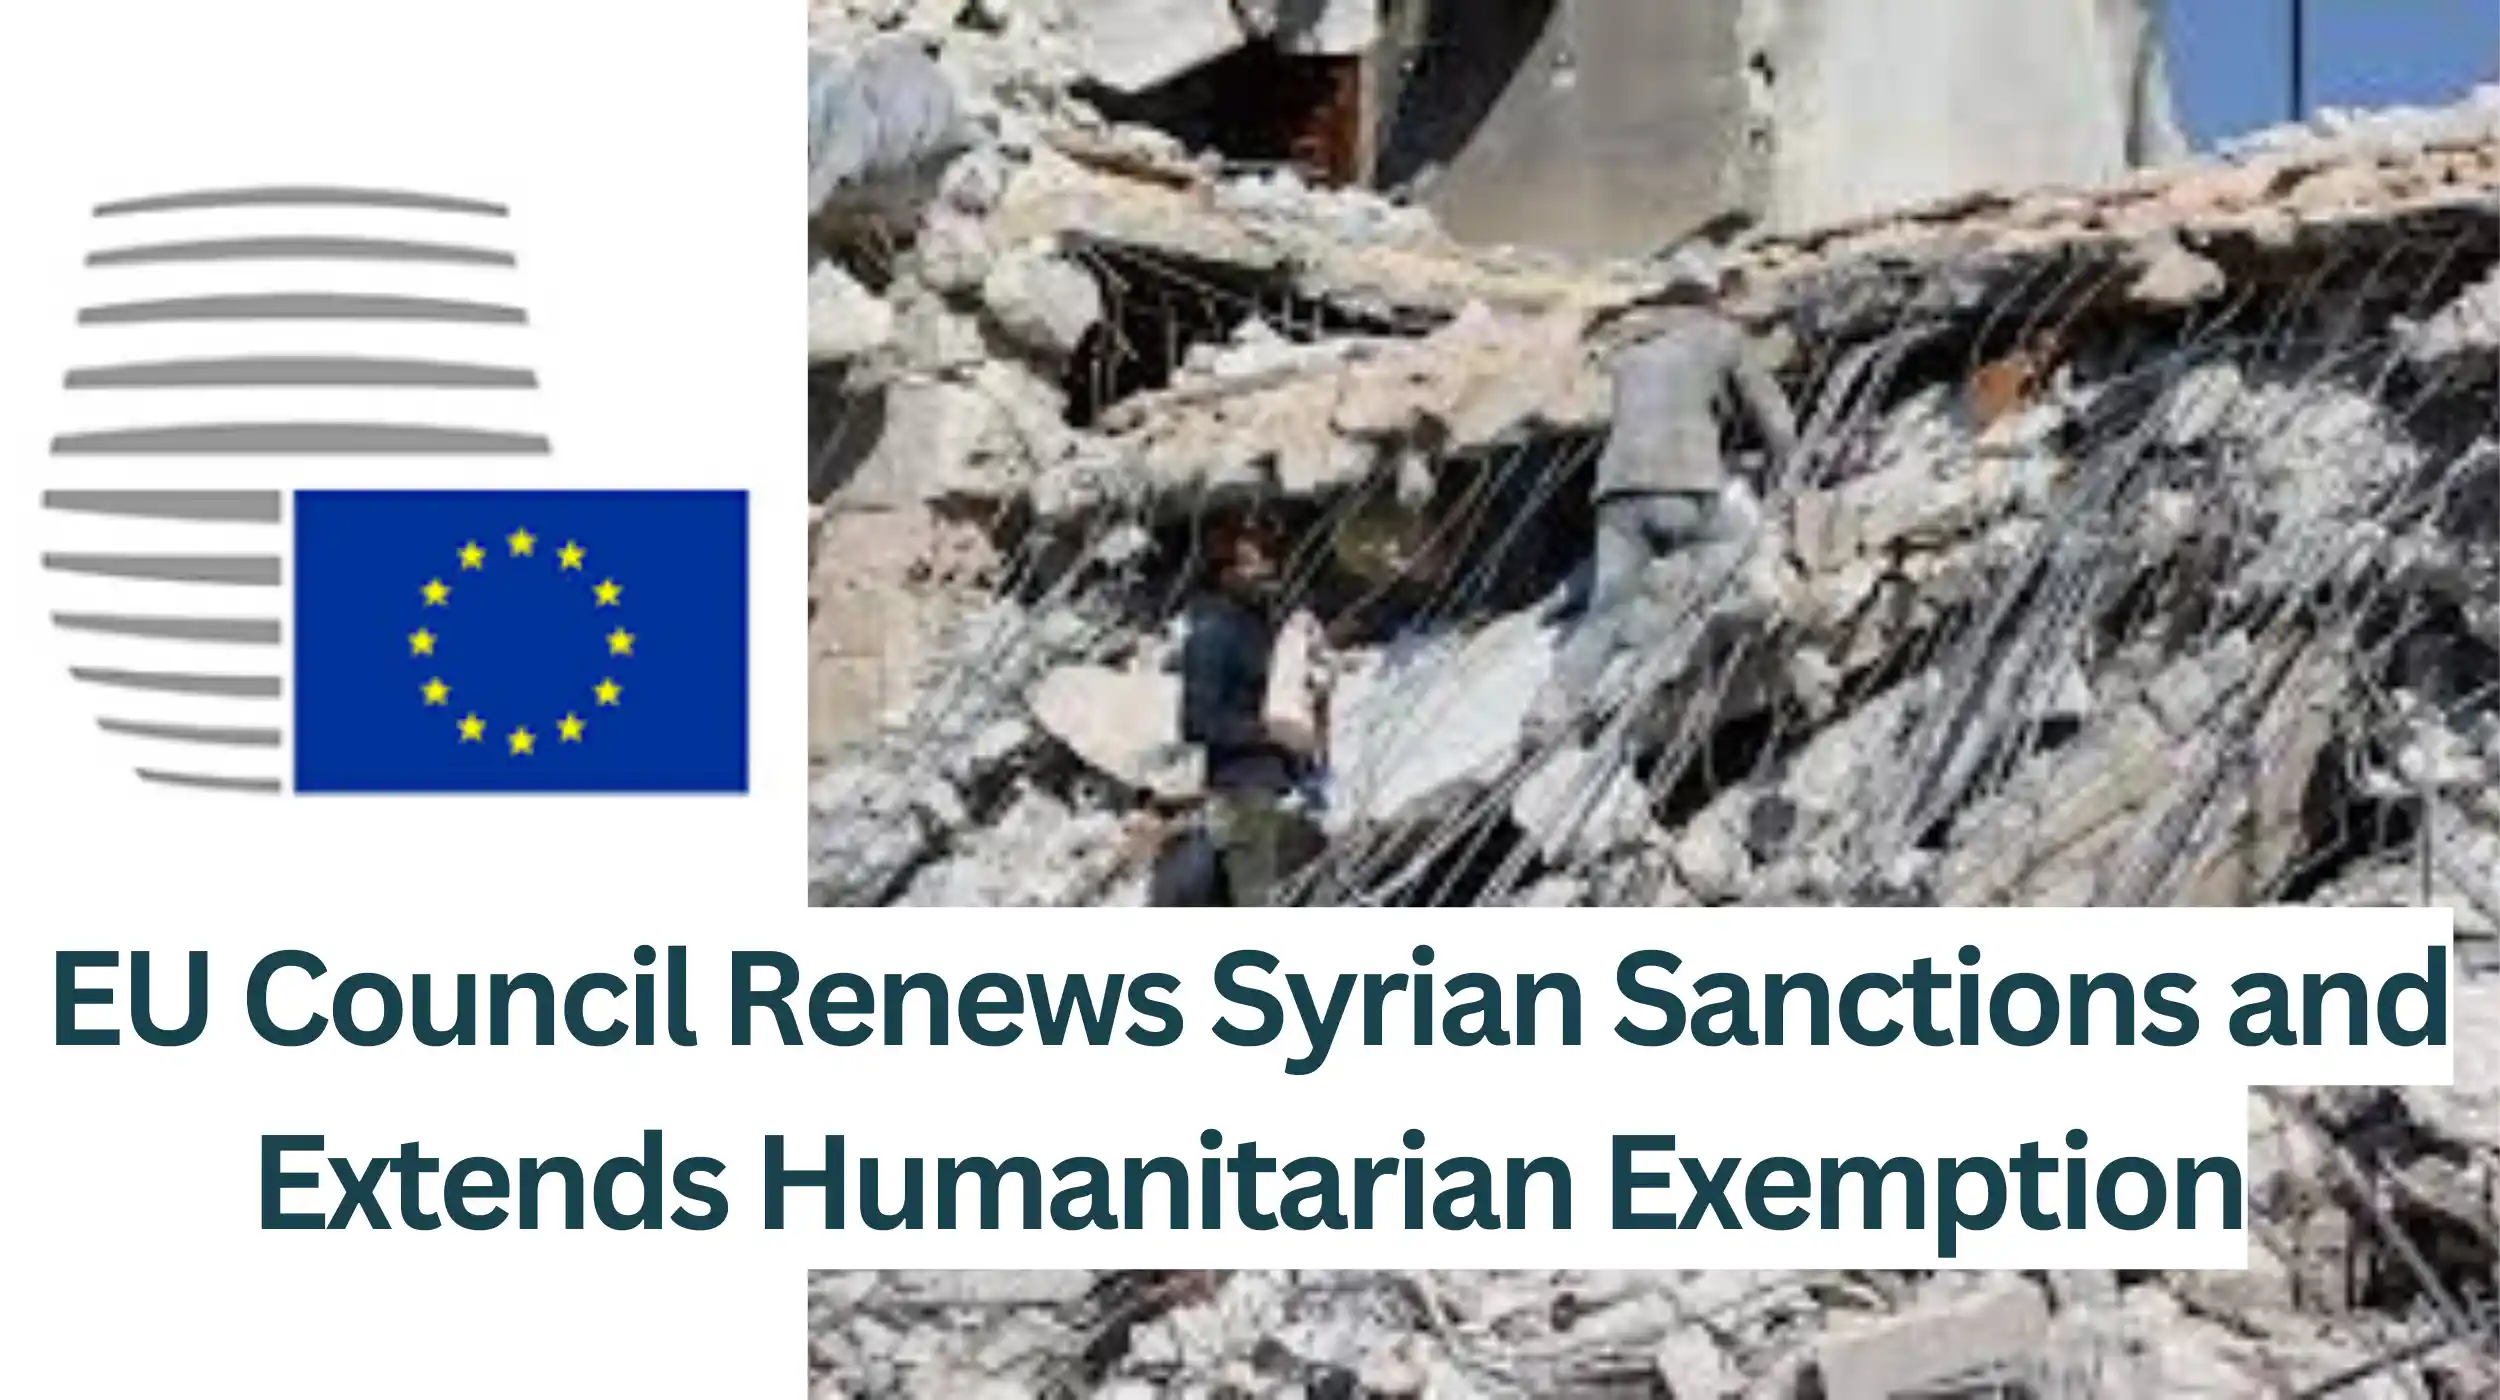 U-Council-Renews-Syrian-Sanctions-and-Extends-Humanitarian-Exemption